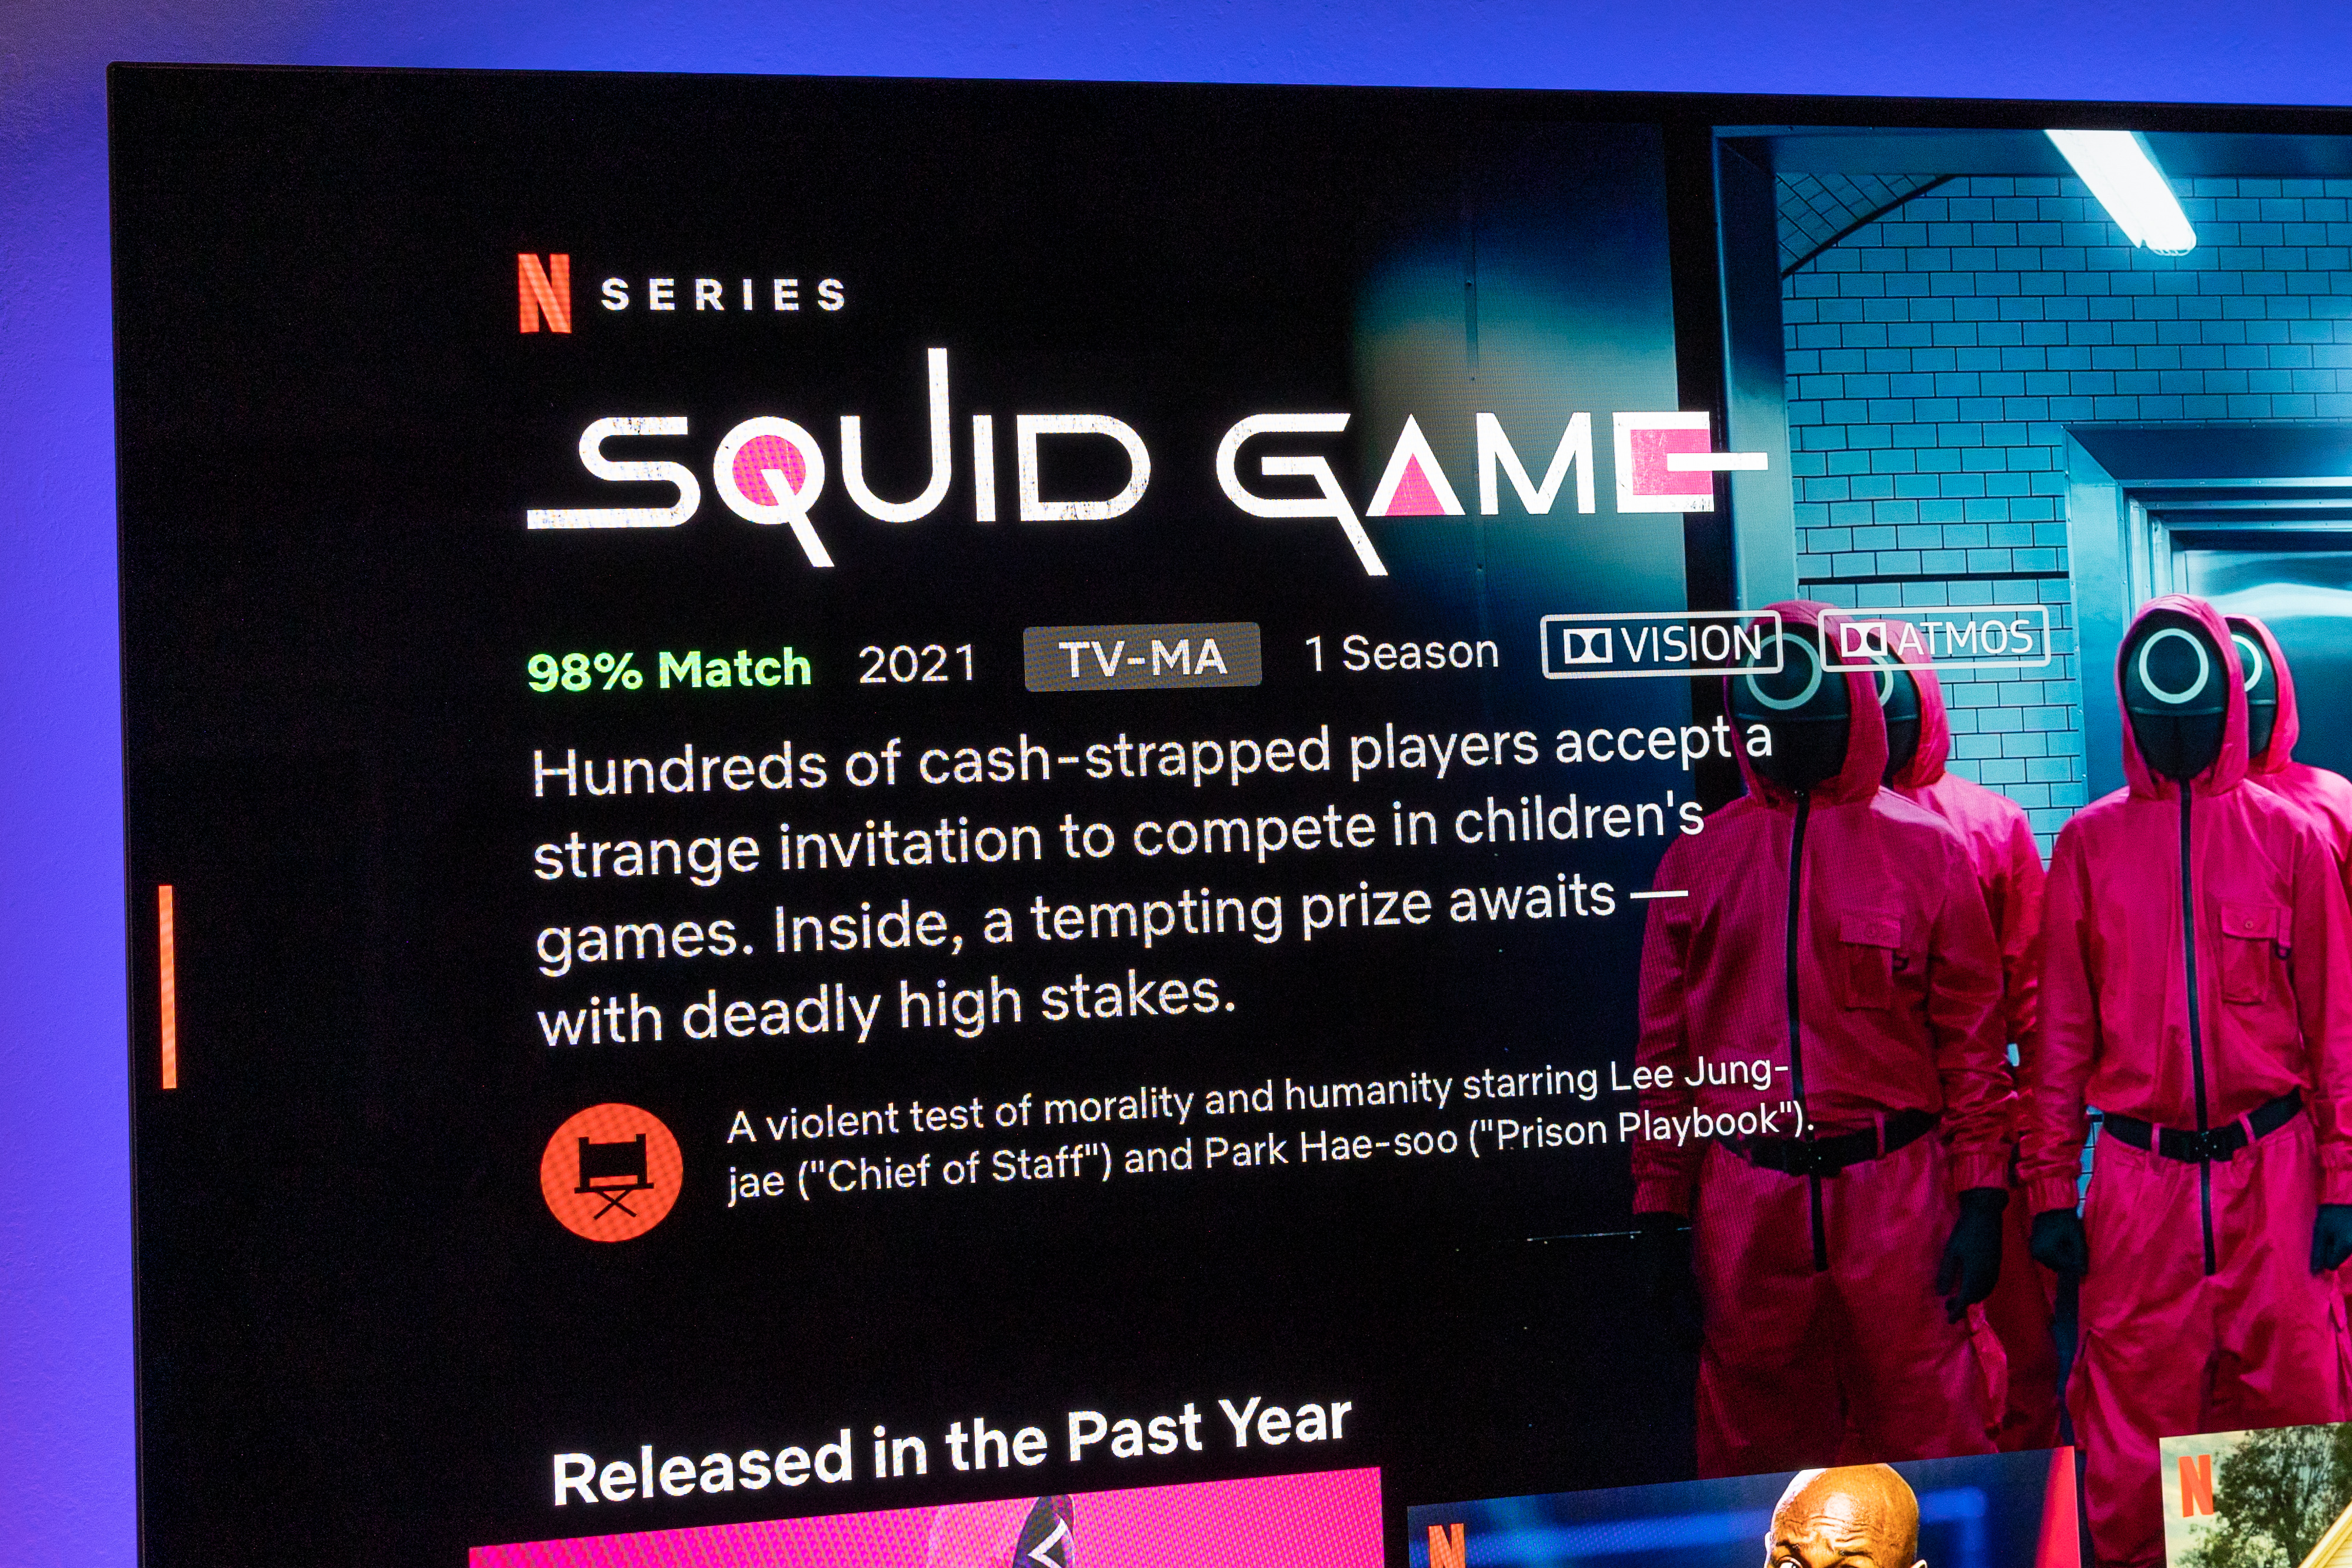 How Squid Game Changed the TV Game